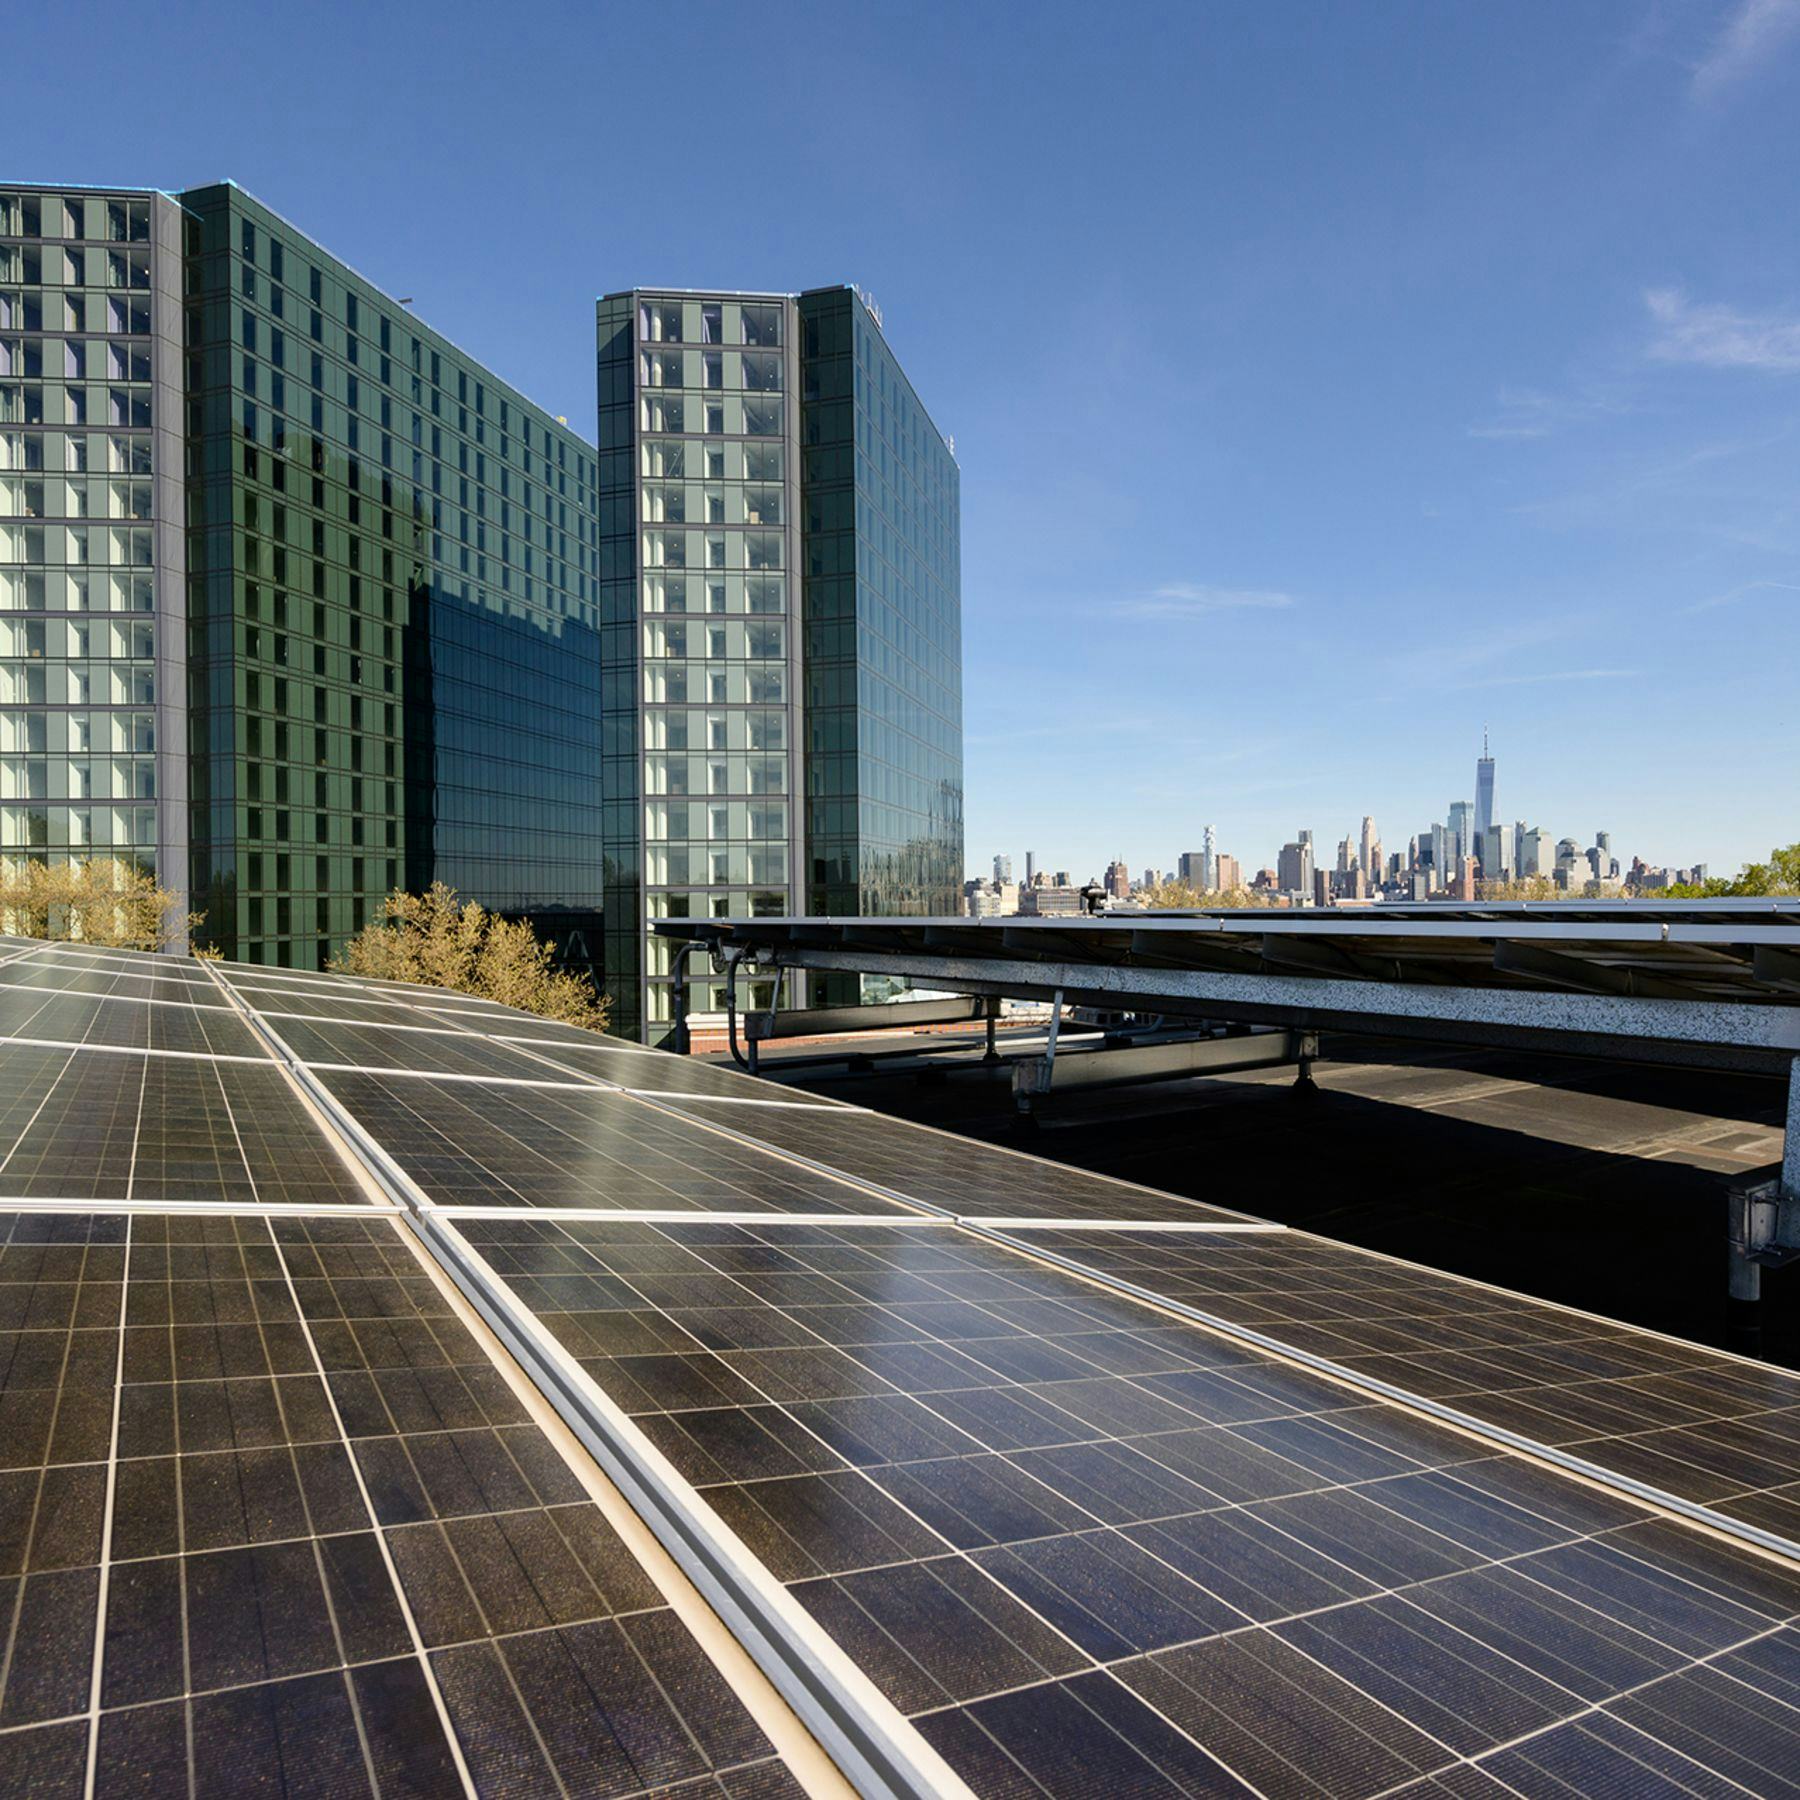 Solar panels on Stevens campus with the city skyline and two residential towers in the background